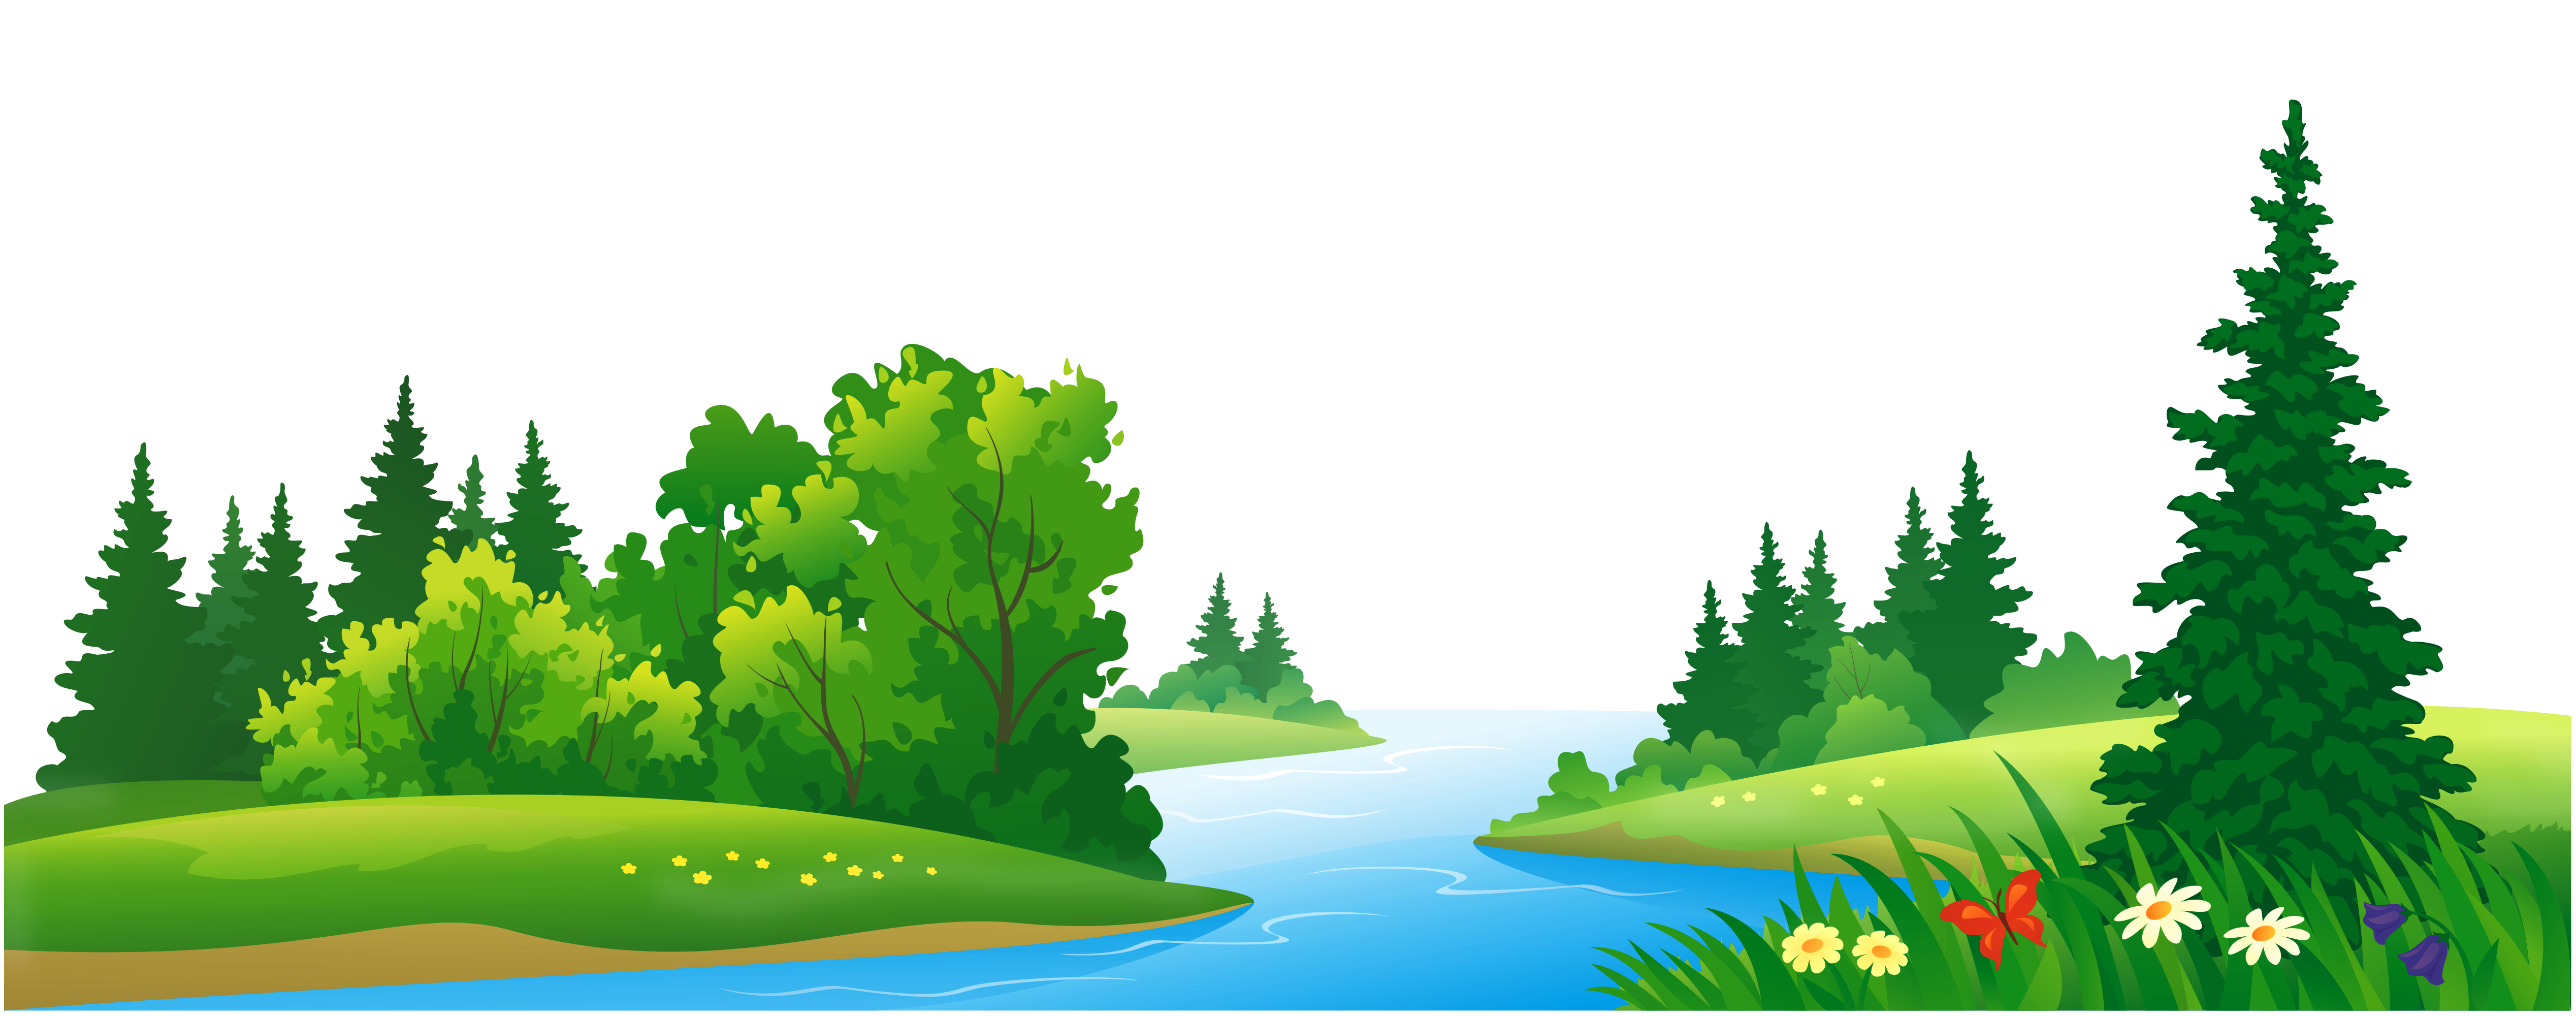 Lake clipart free download on WebStockReview